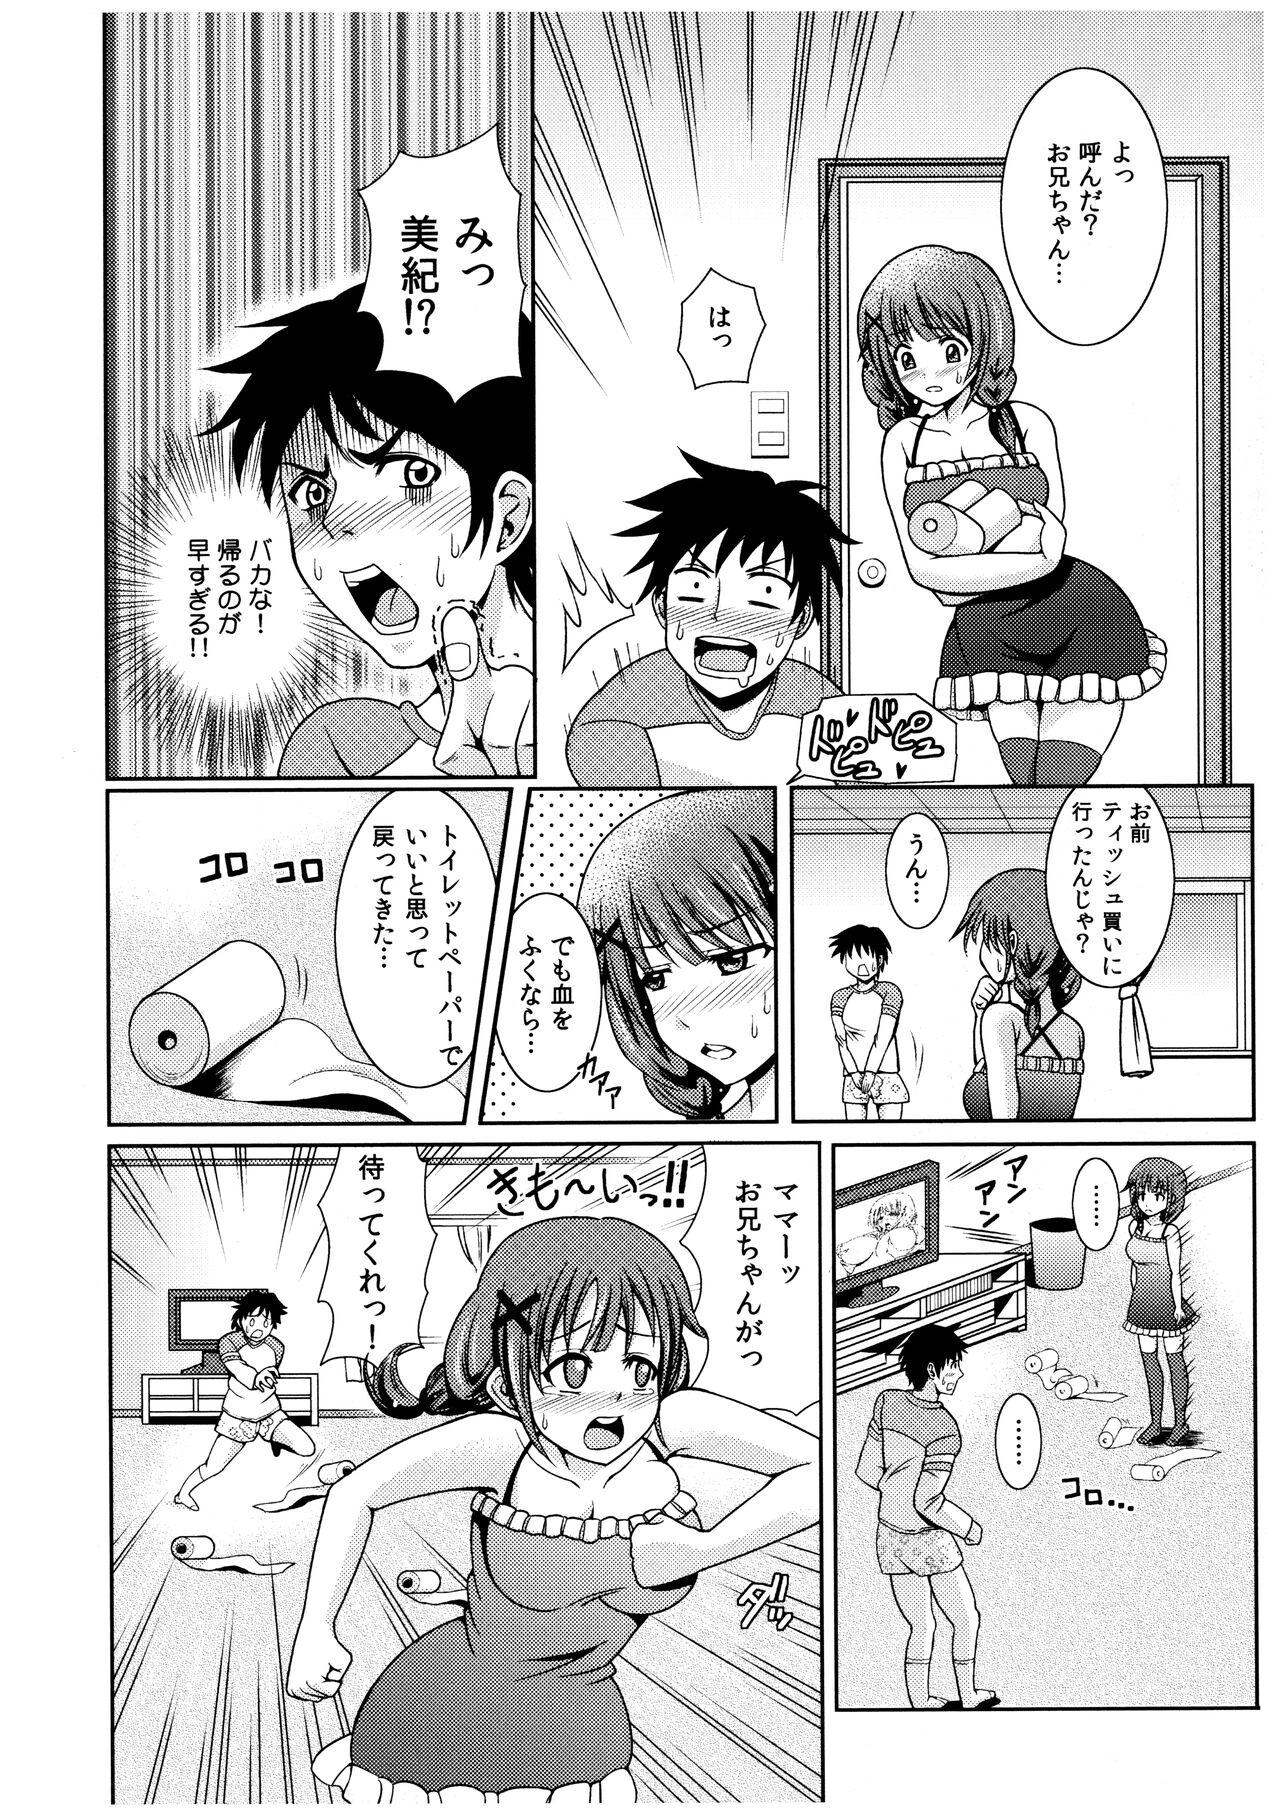 Gapes Gaping Asshole Oniichan Socchi Itte Ii? Step - Page 9